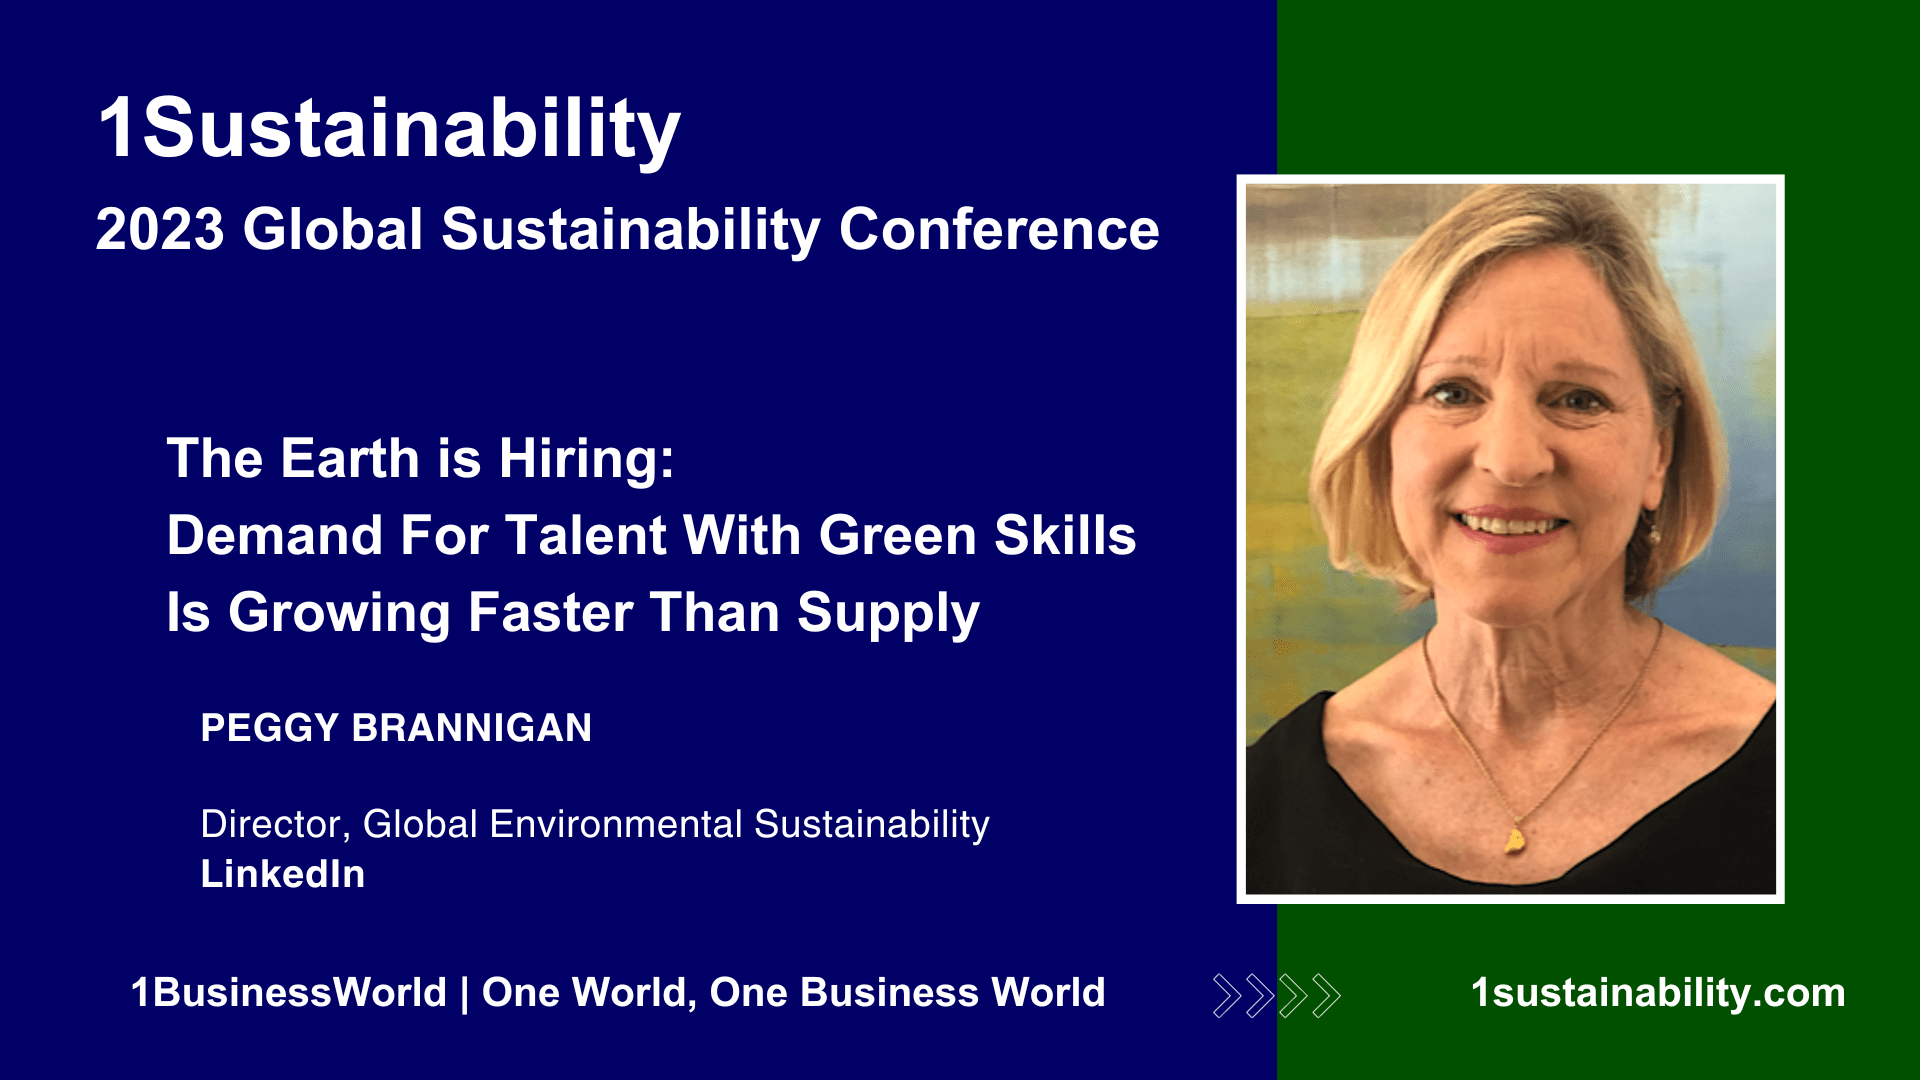 The Earth is Hiring: Demand For Talent With Green Skills Is Growing Faster Than Supply | Peggy Brannigan